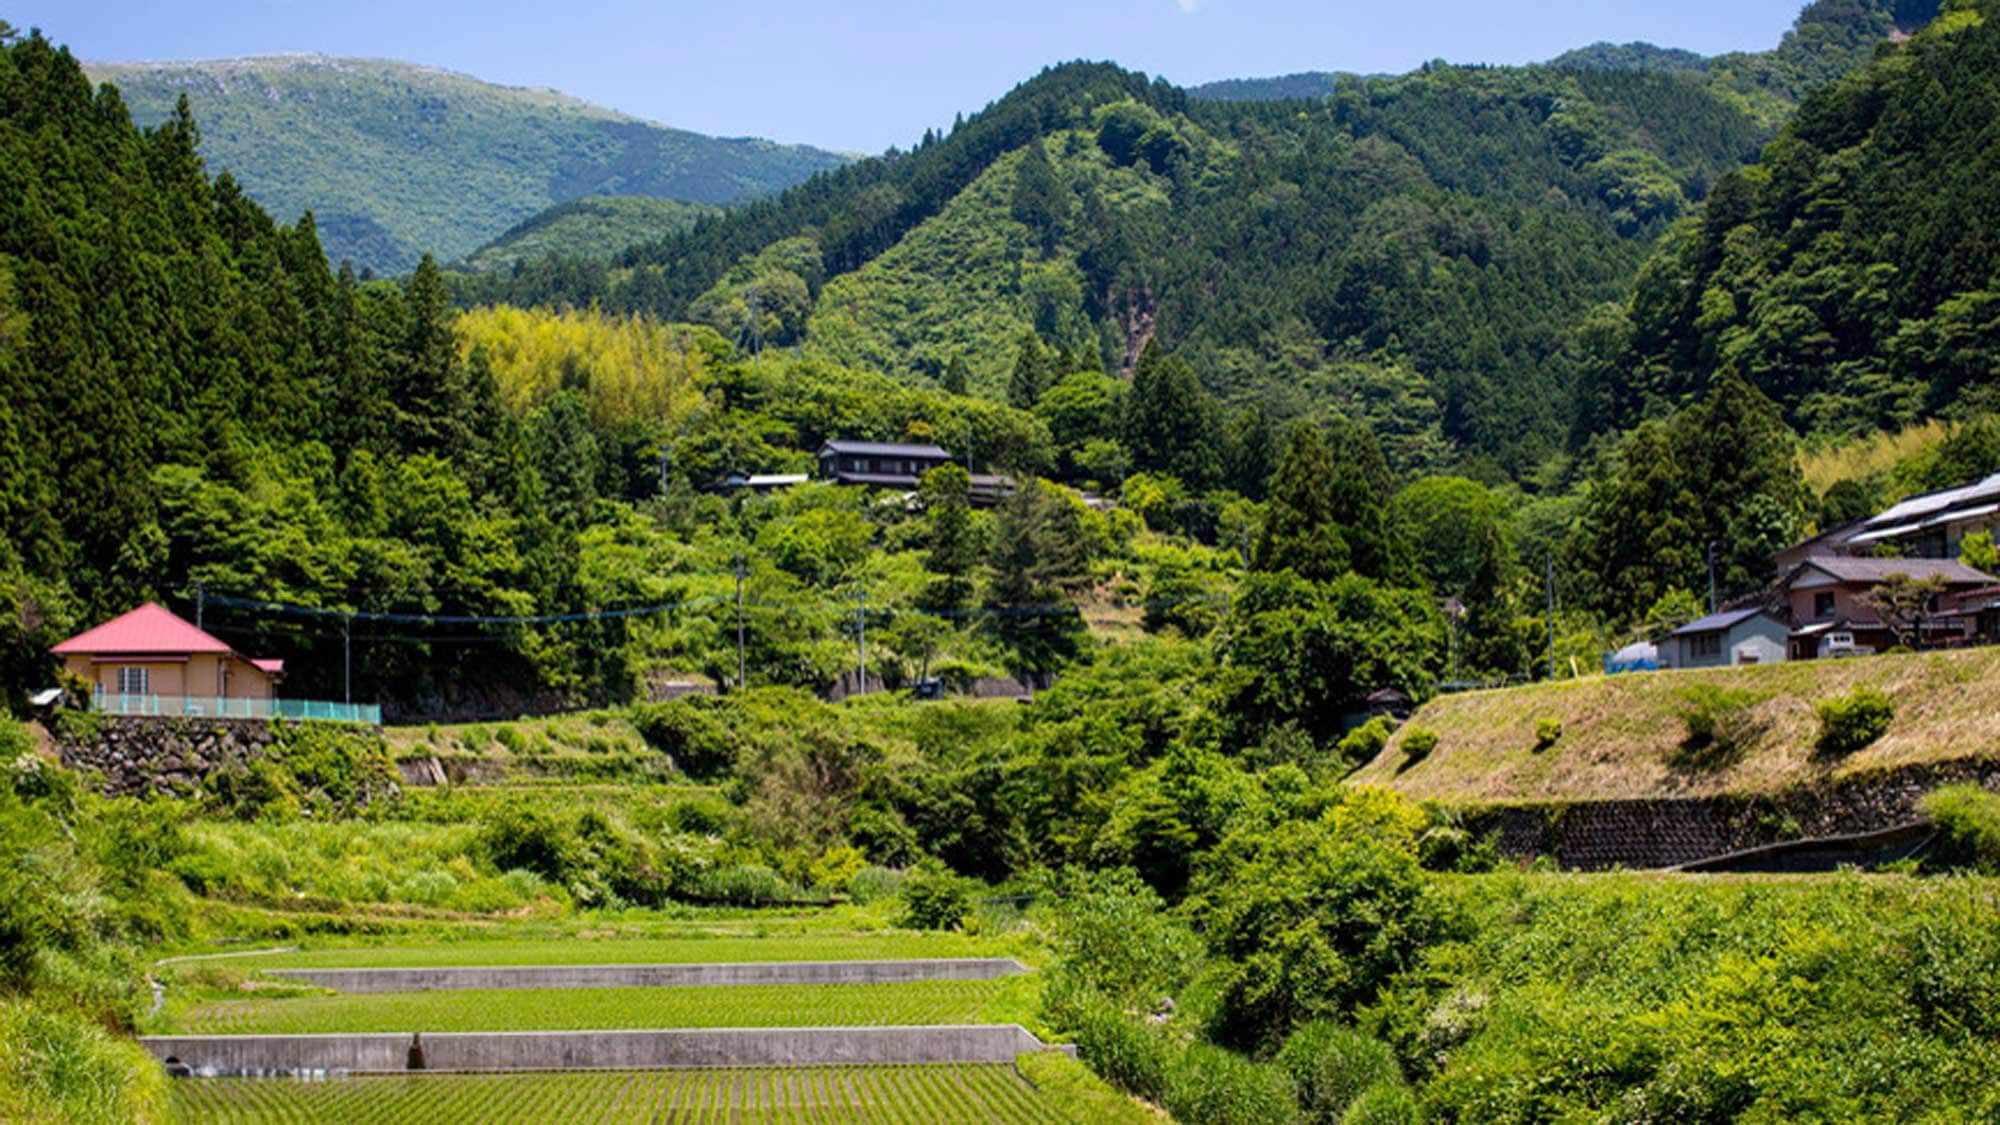 [Appearance] Kamikoya distant view is a mountain village that spreads naturally